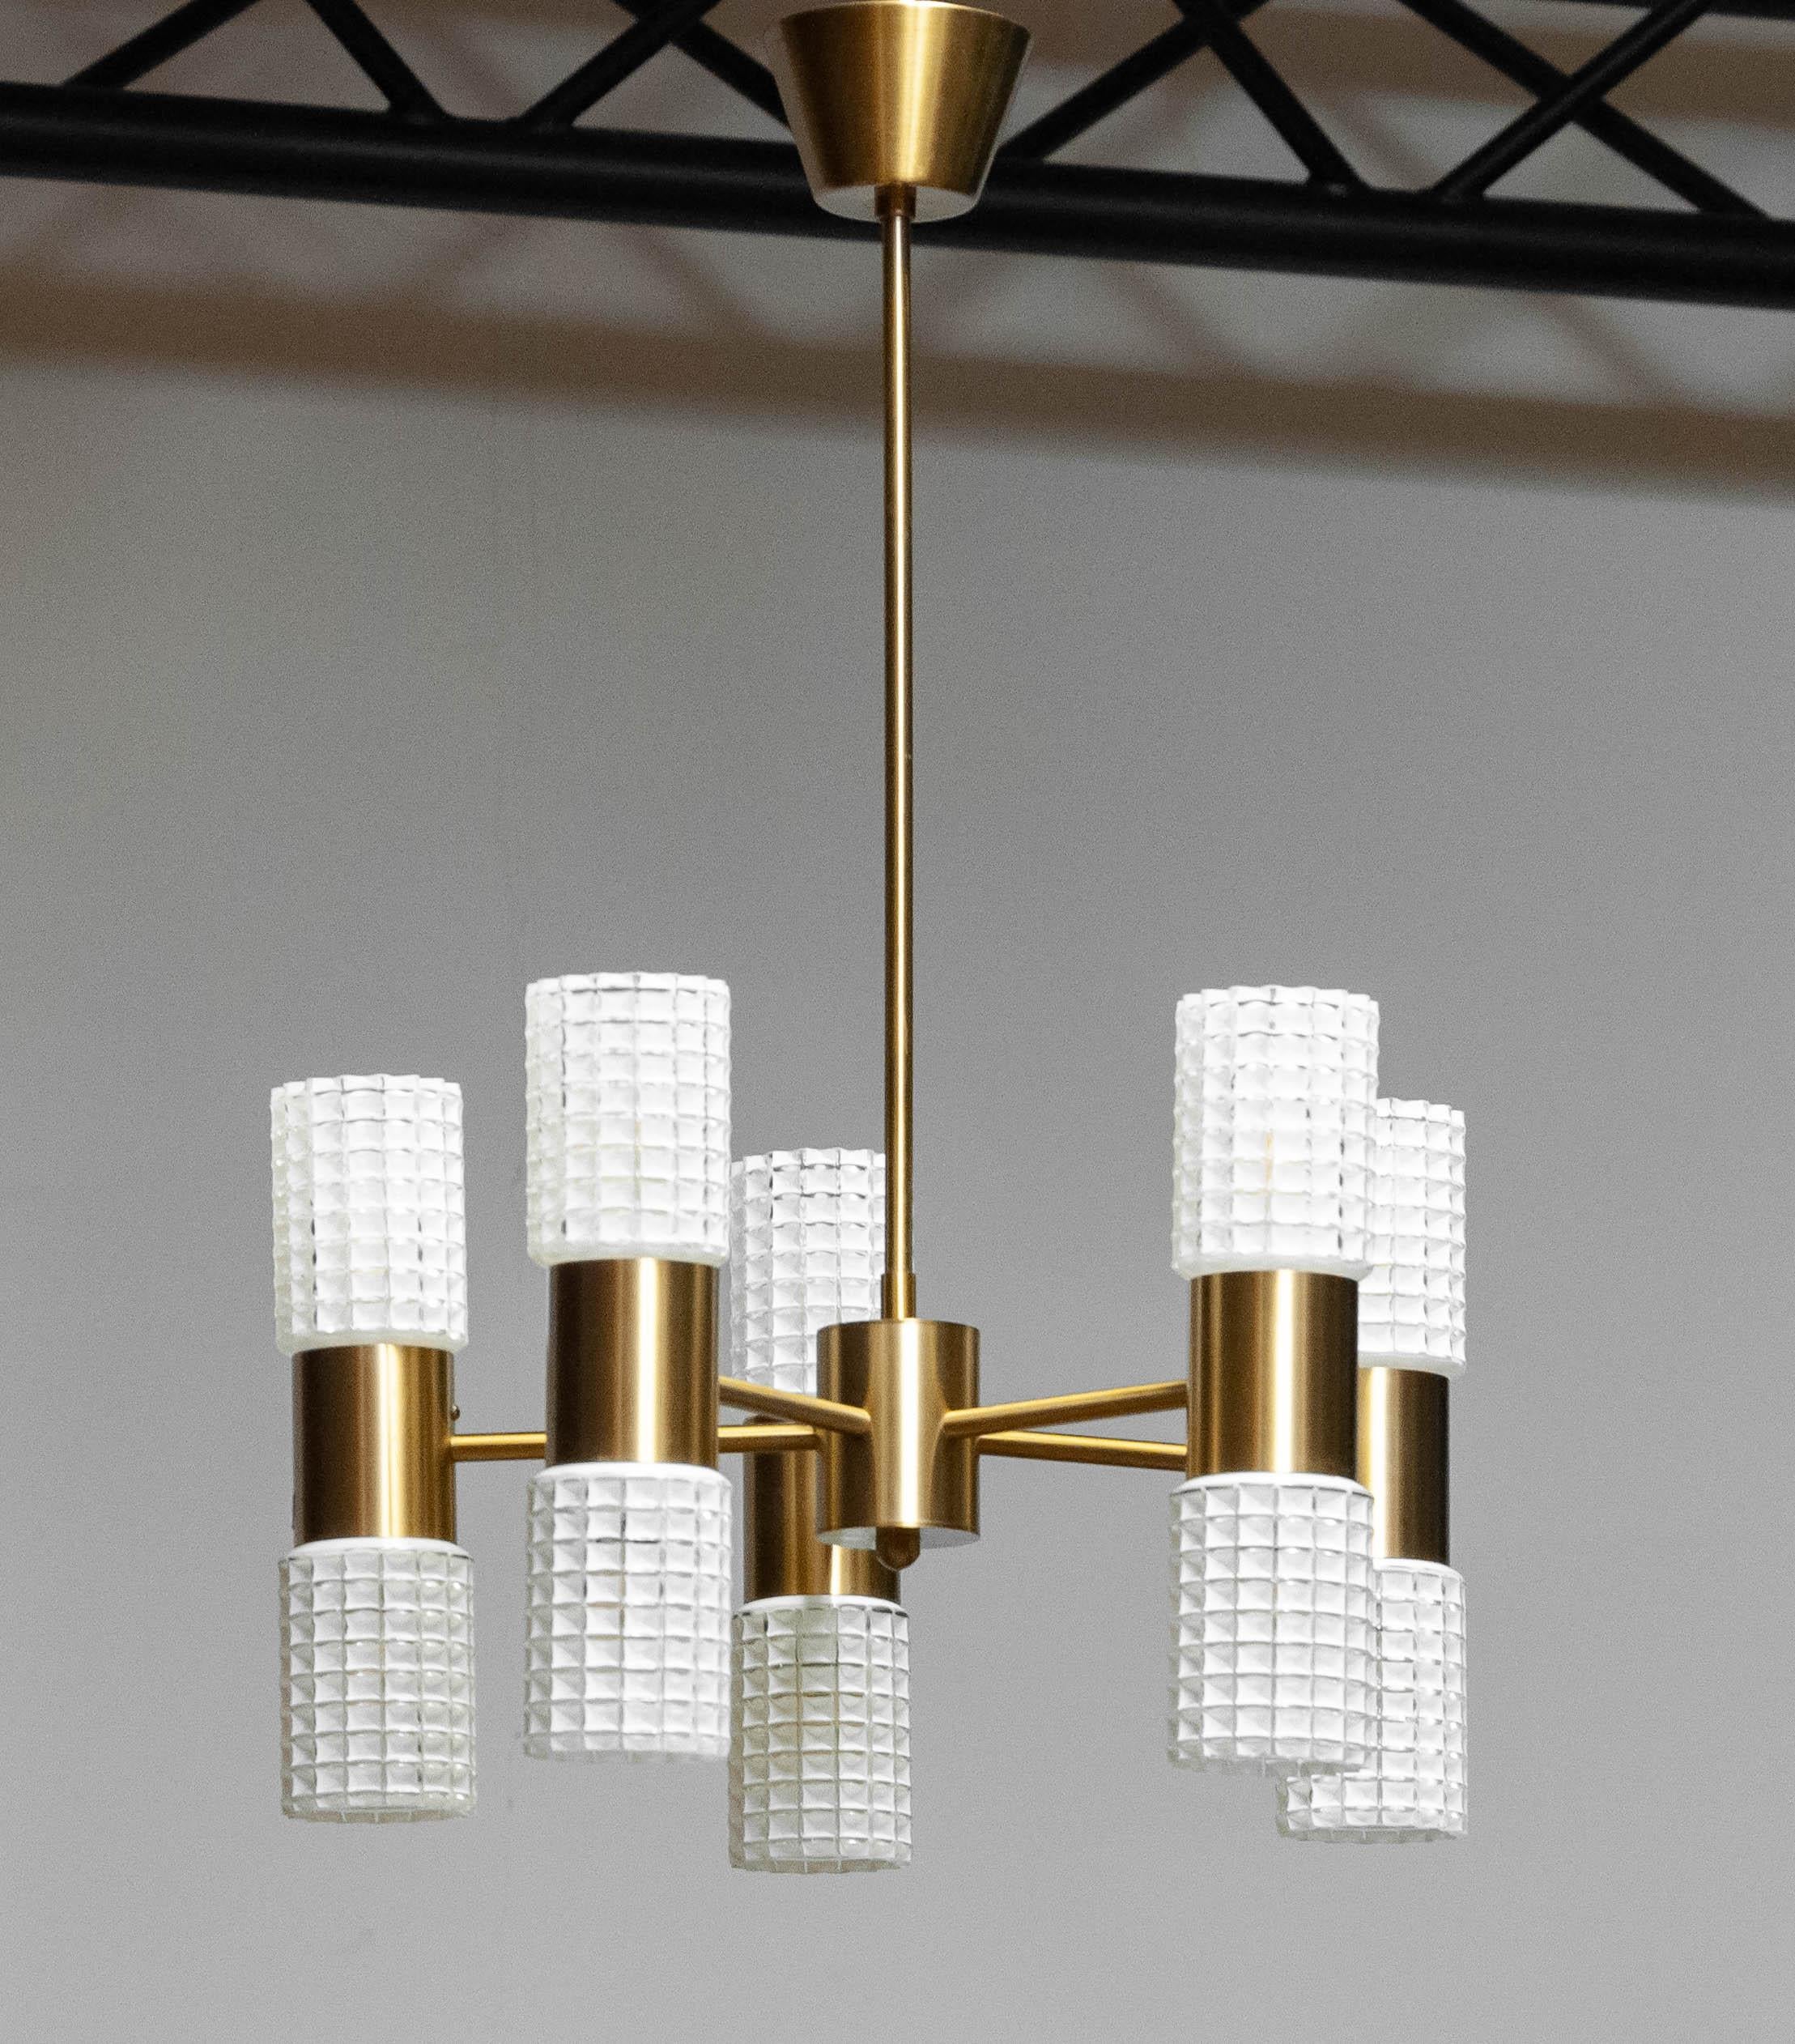 Beautiful high quality brass and art glass chandelier attributed to Hans-Agne Jacobssen for Markaryd AB, Sweden
It consists five arms with two white glass shades each which ( upper and lower ) can be switched separately. Ten E14 screw